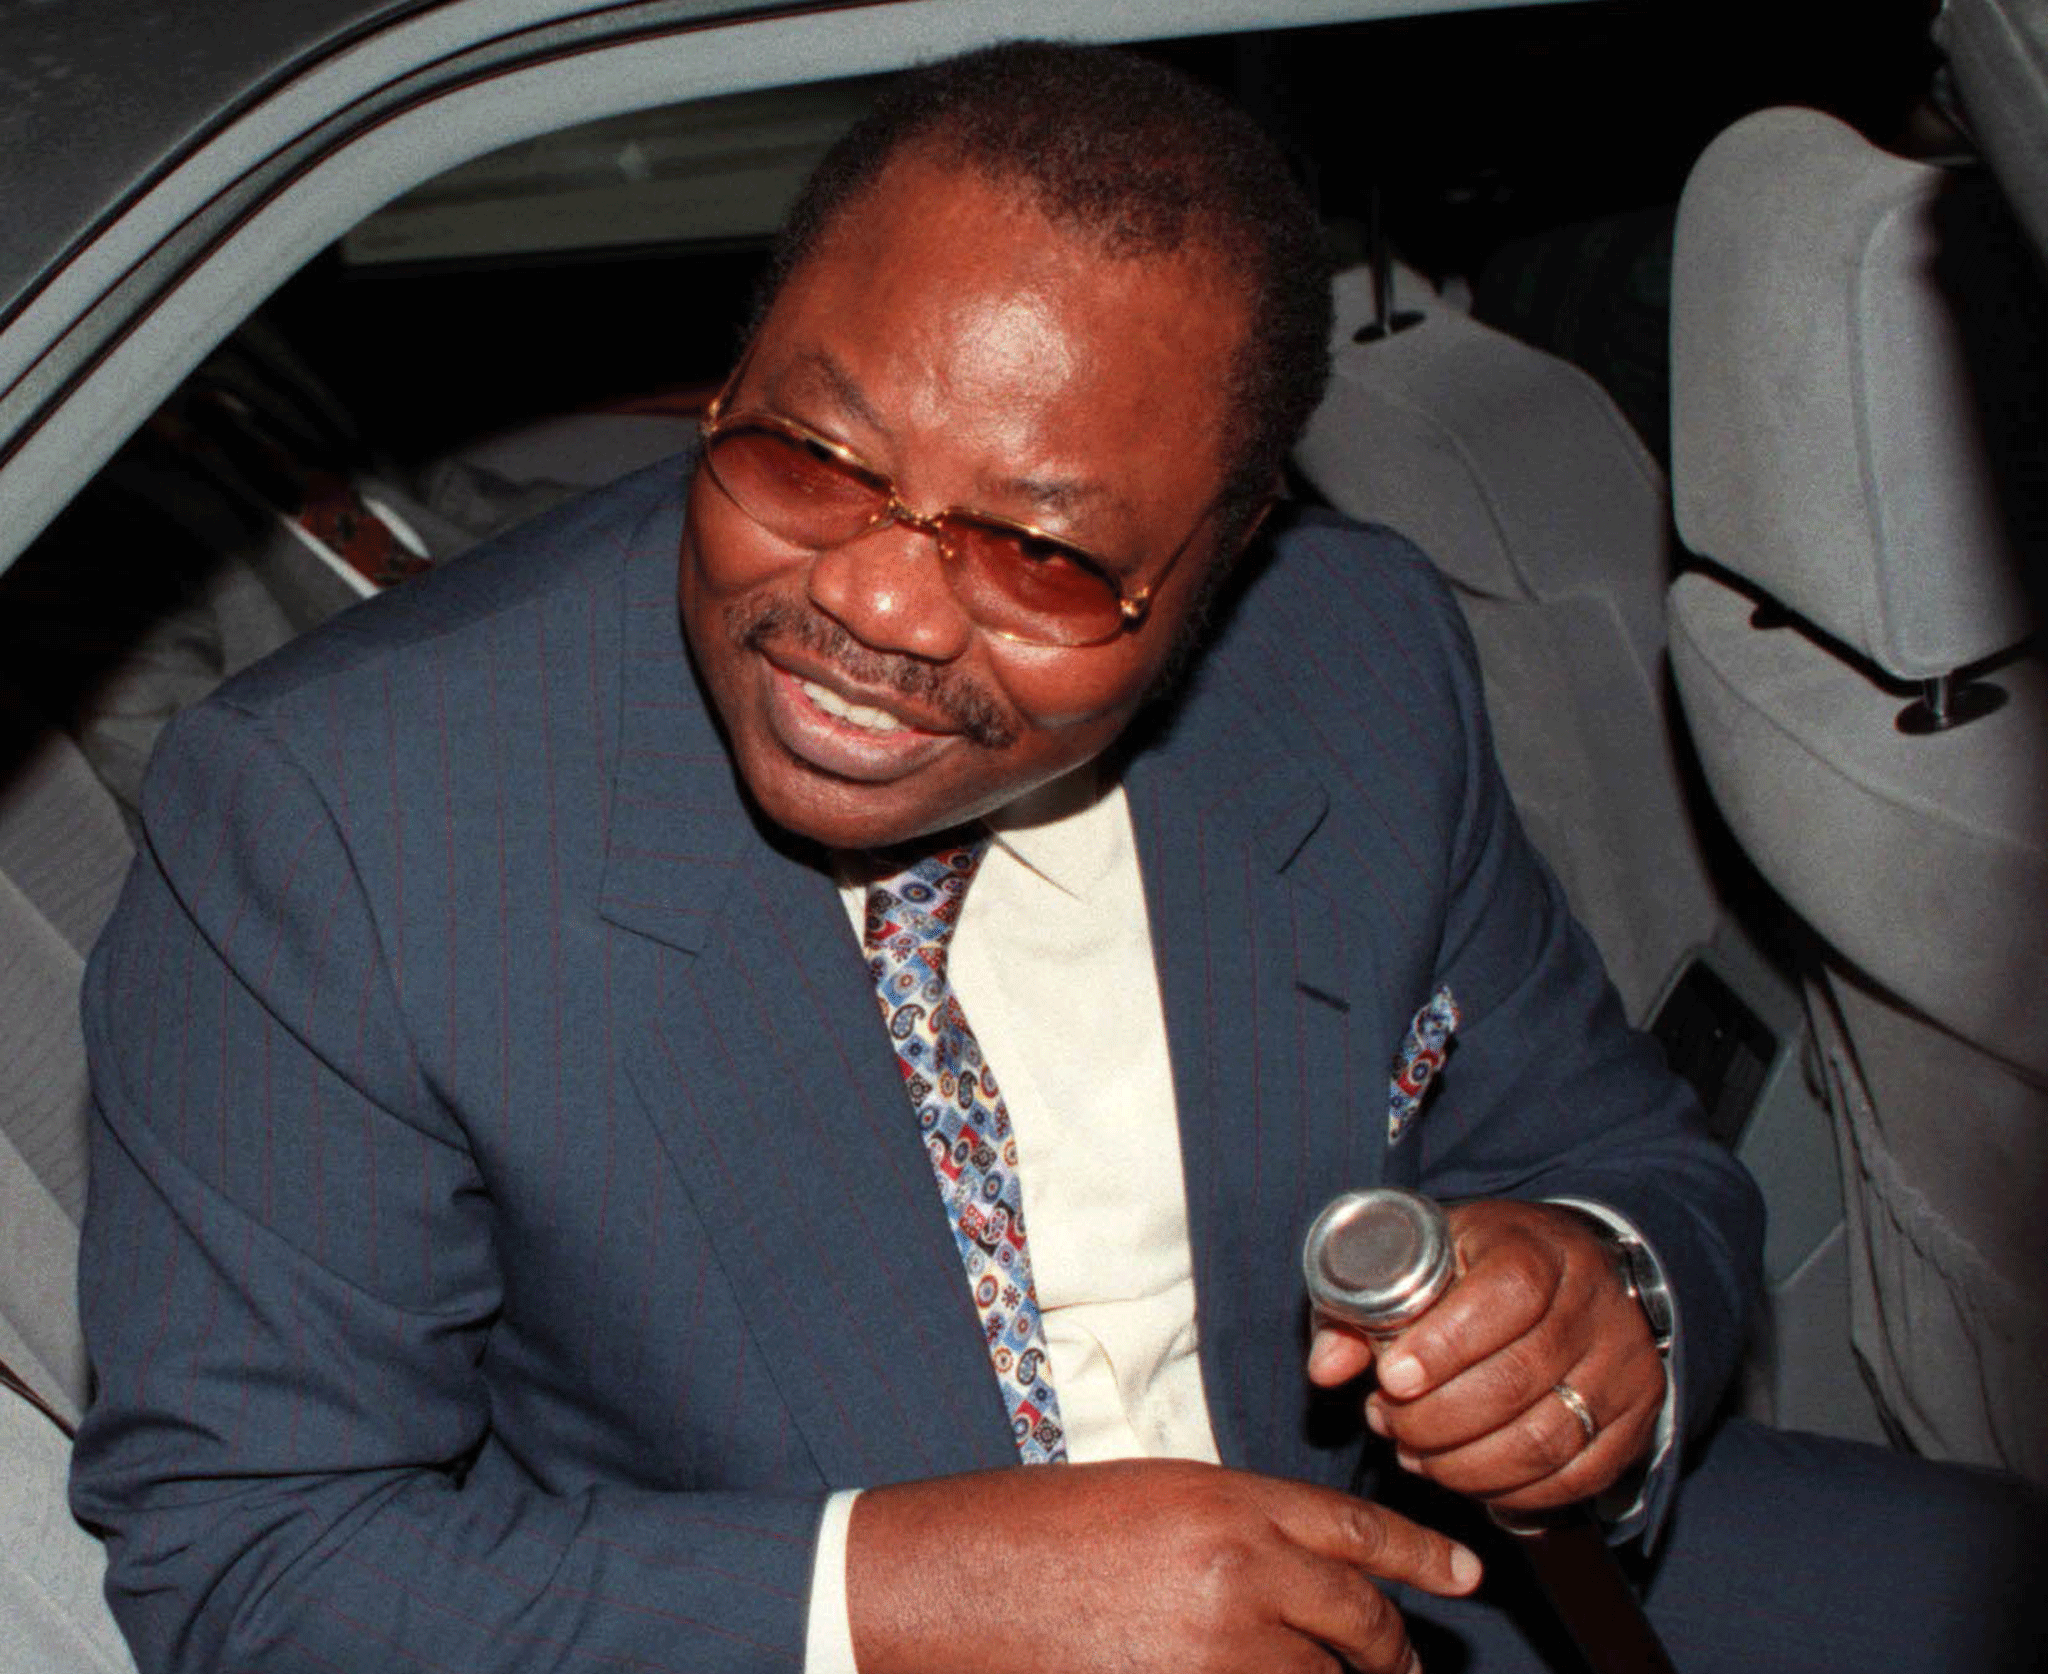 Former Nigerian oil minister Dan Etete, who controlled Malabu, a company that received hundred of millions of dollars from the deal